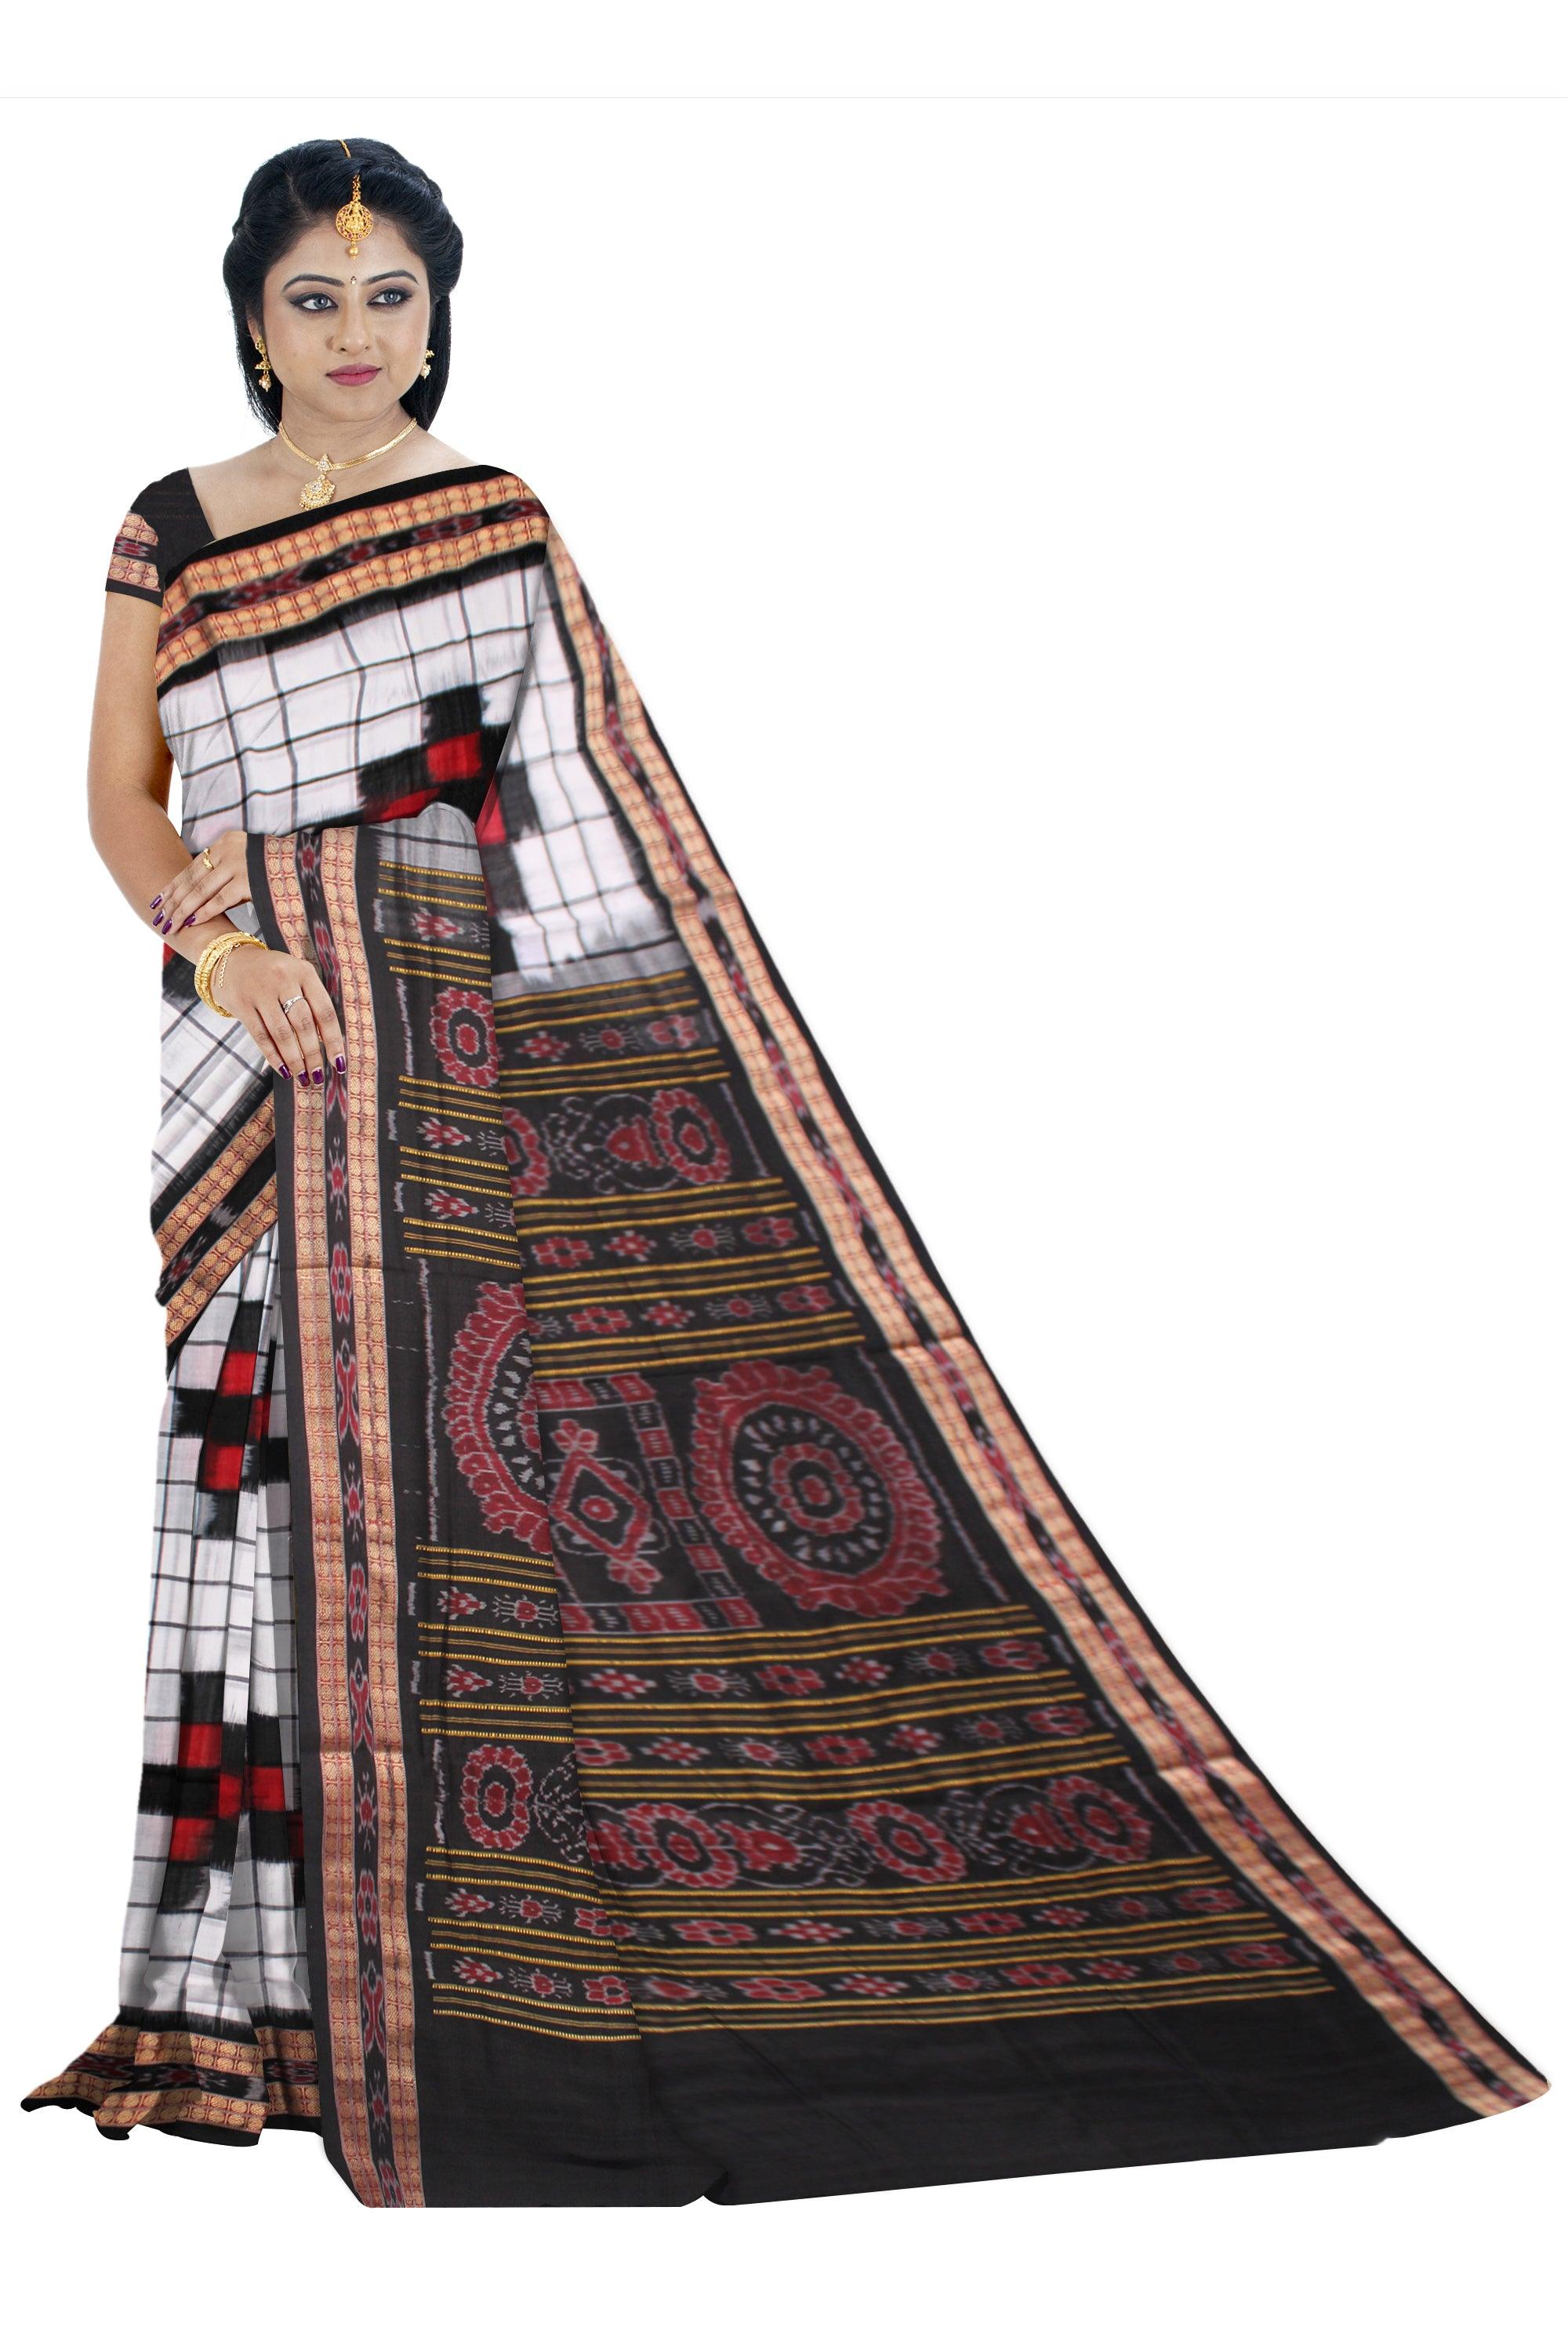 LATEST BIG PASAPALI PATTERN COTTON SAREE IS WHITE WITH BLACK AND RED COLOR BASE, ATTACHED WITH BLOUSE PIECE. - Koshali Arts & Crafts Enterprise